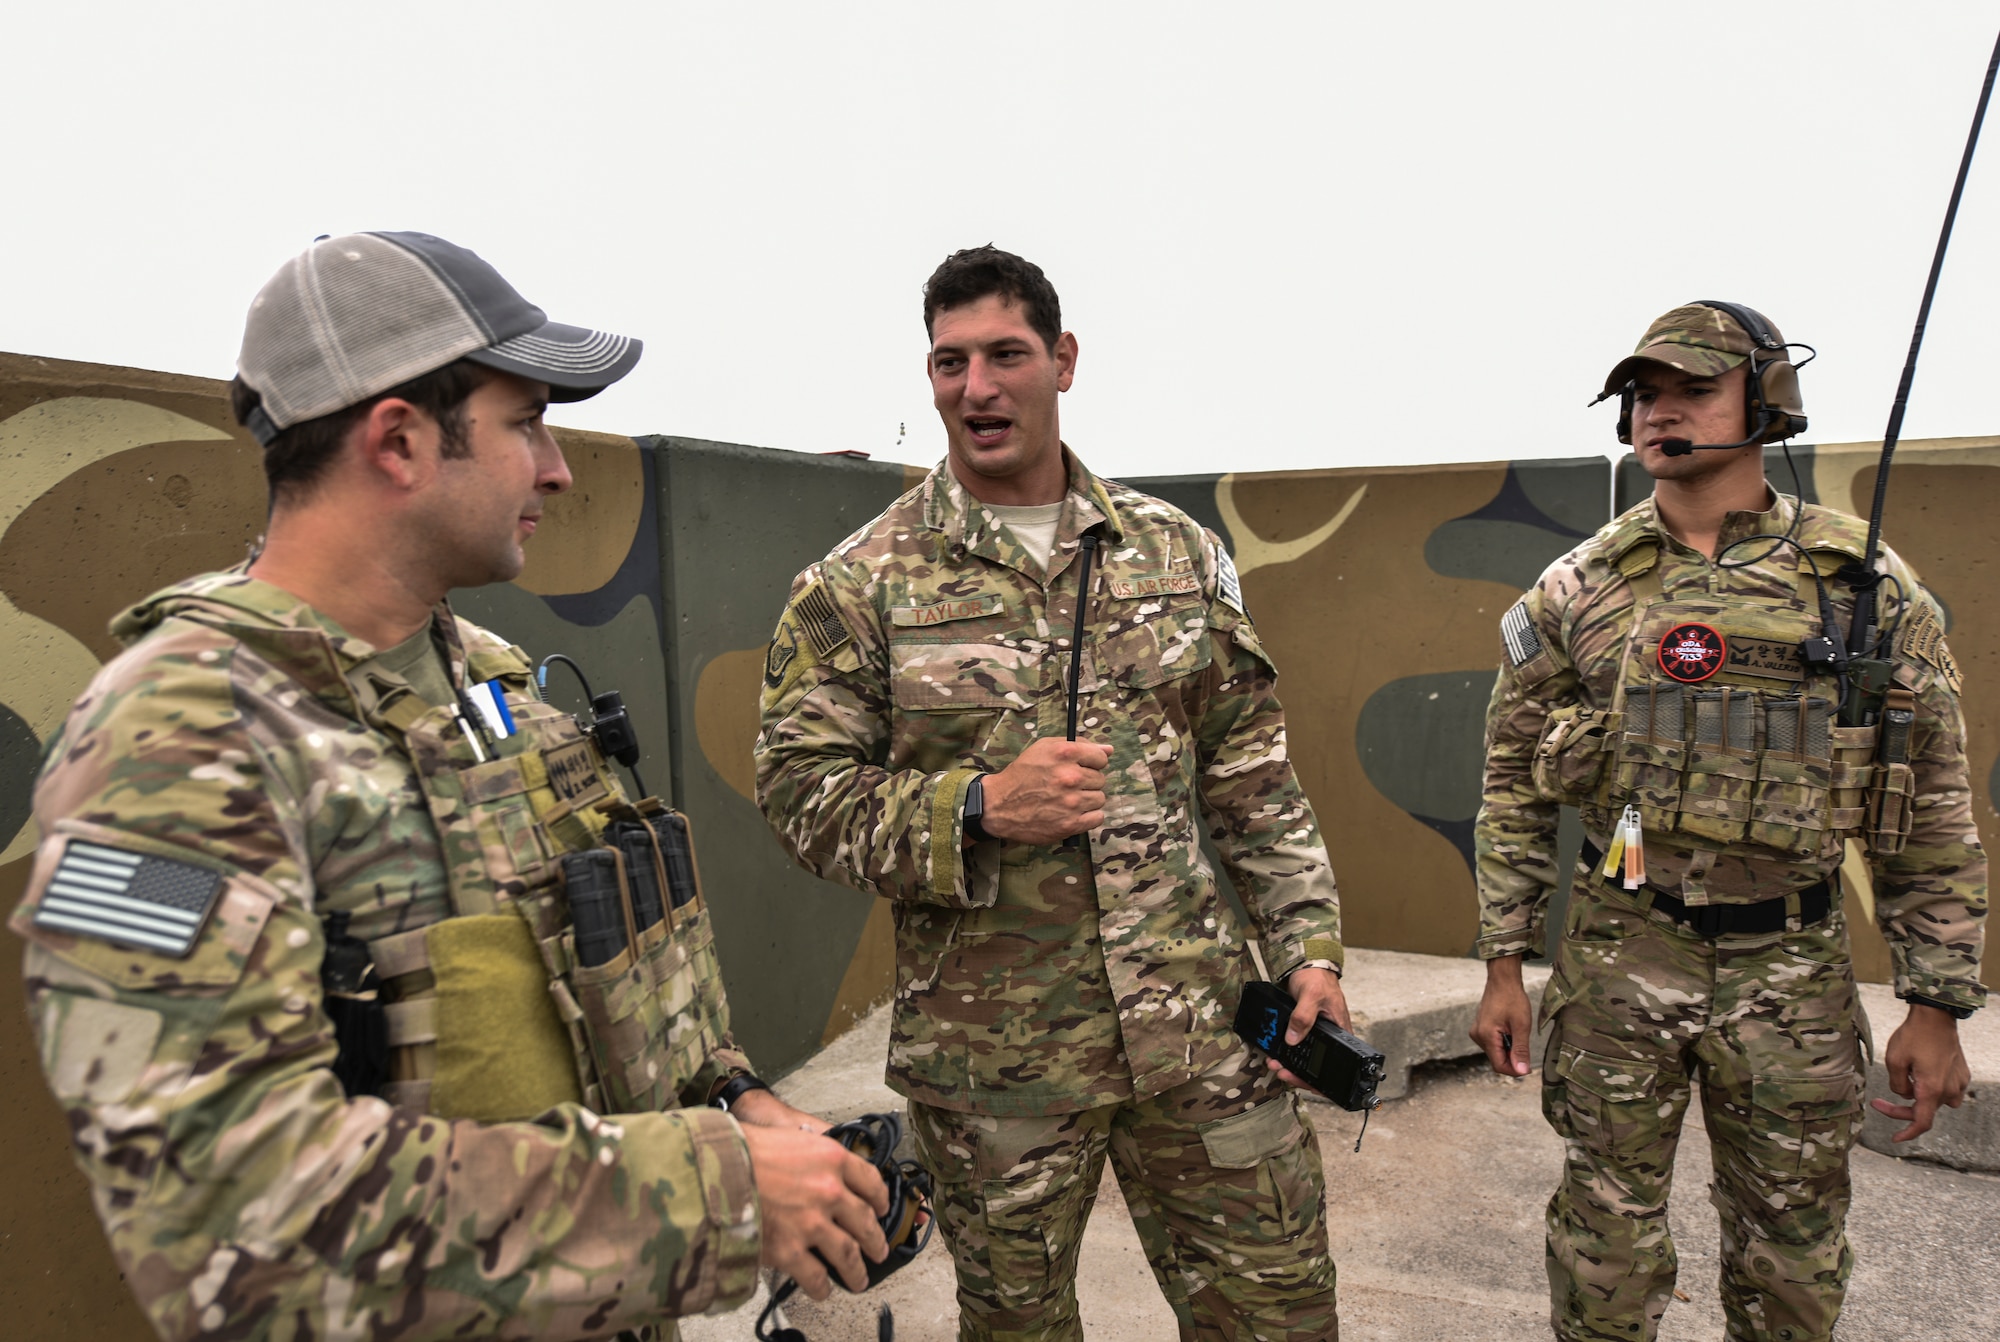 U.S. Air Force Staff Sgt. Thad Taylor, a tactical air control party specialist from the 15th Air Support Operations Squadron, Fort Stewart, Georgia (middle), debriefs two U.S. Army soldiers from the 7th Special Forces Group on their performance after simulated close air support training Sept. 13, 2018 at Kunsan Air Base, Republic of Korea. The two soldiers were tasked with guiding live aircraft to multiple different targets for simulated air strikes. (U.S. Air Force photo by Senior Airman Stefan Alvarez)